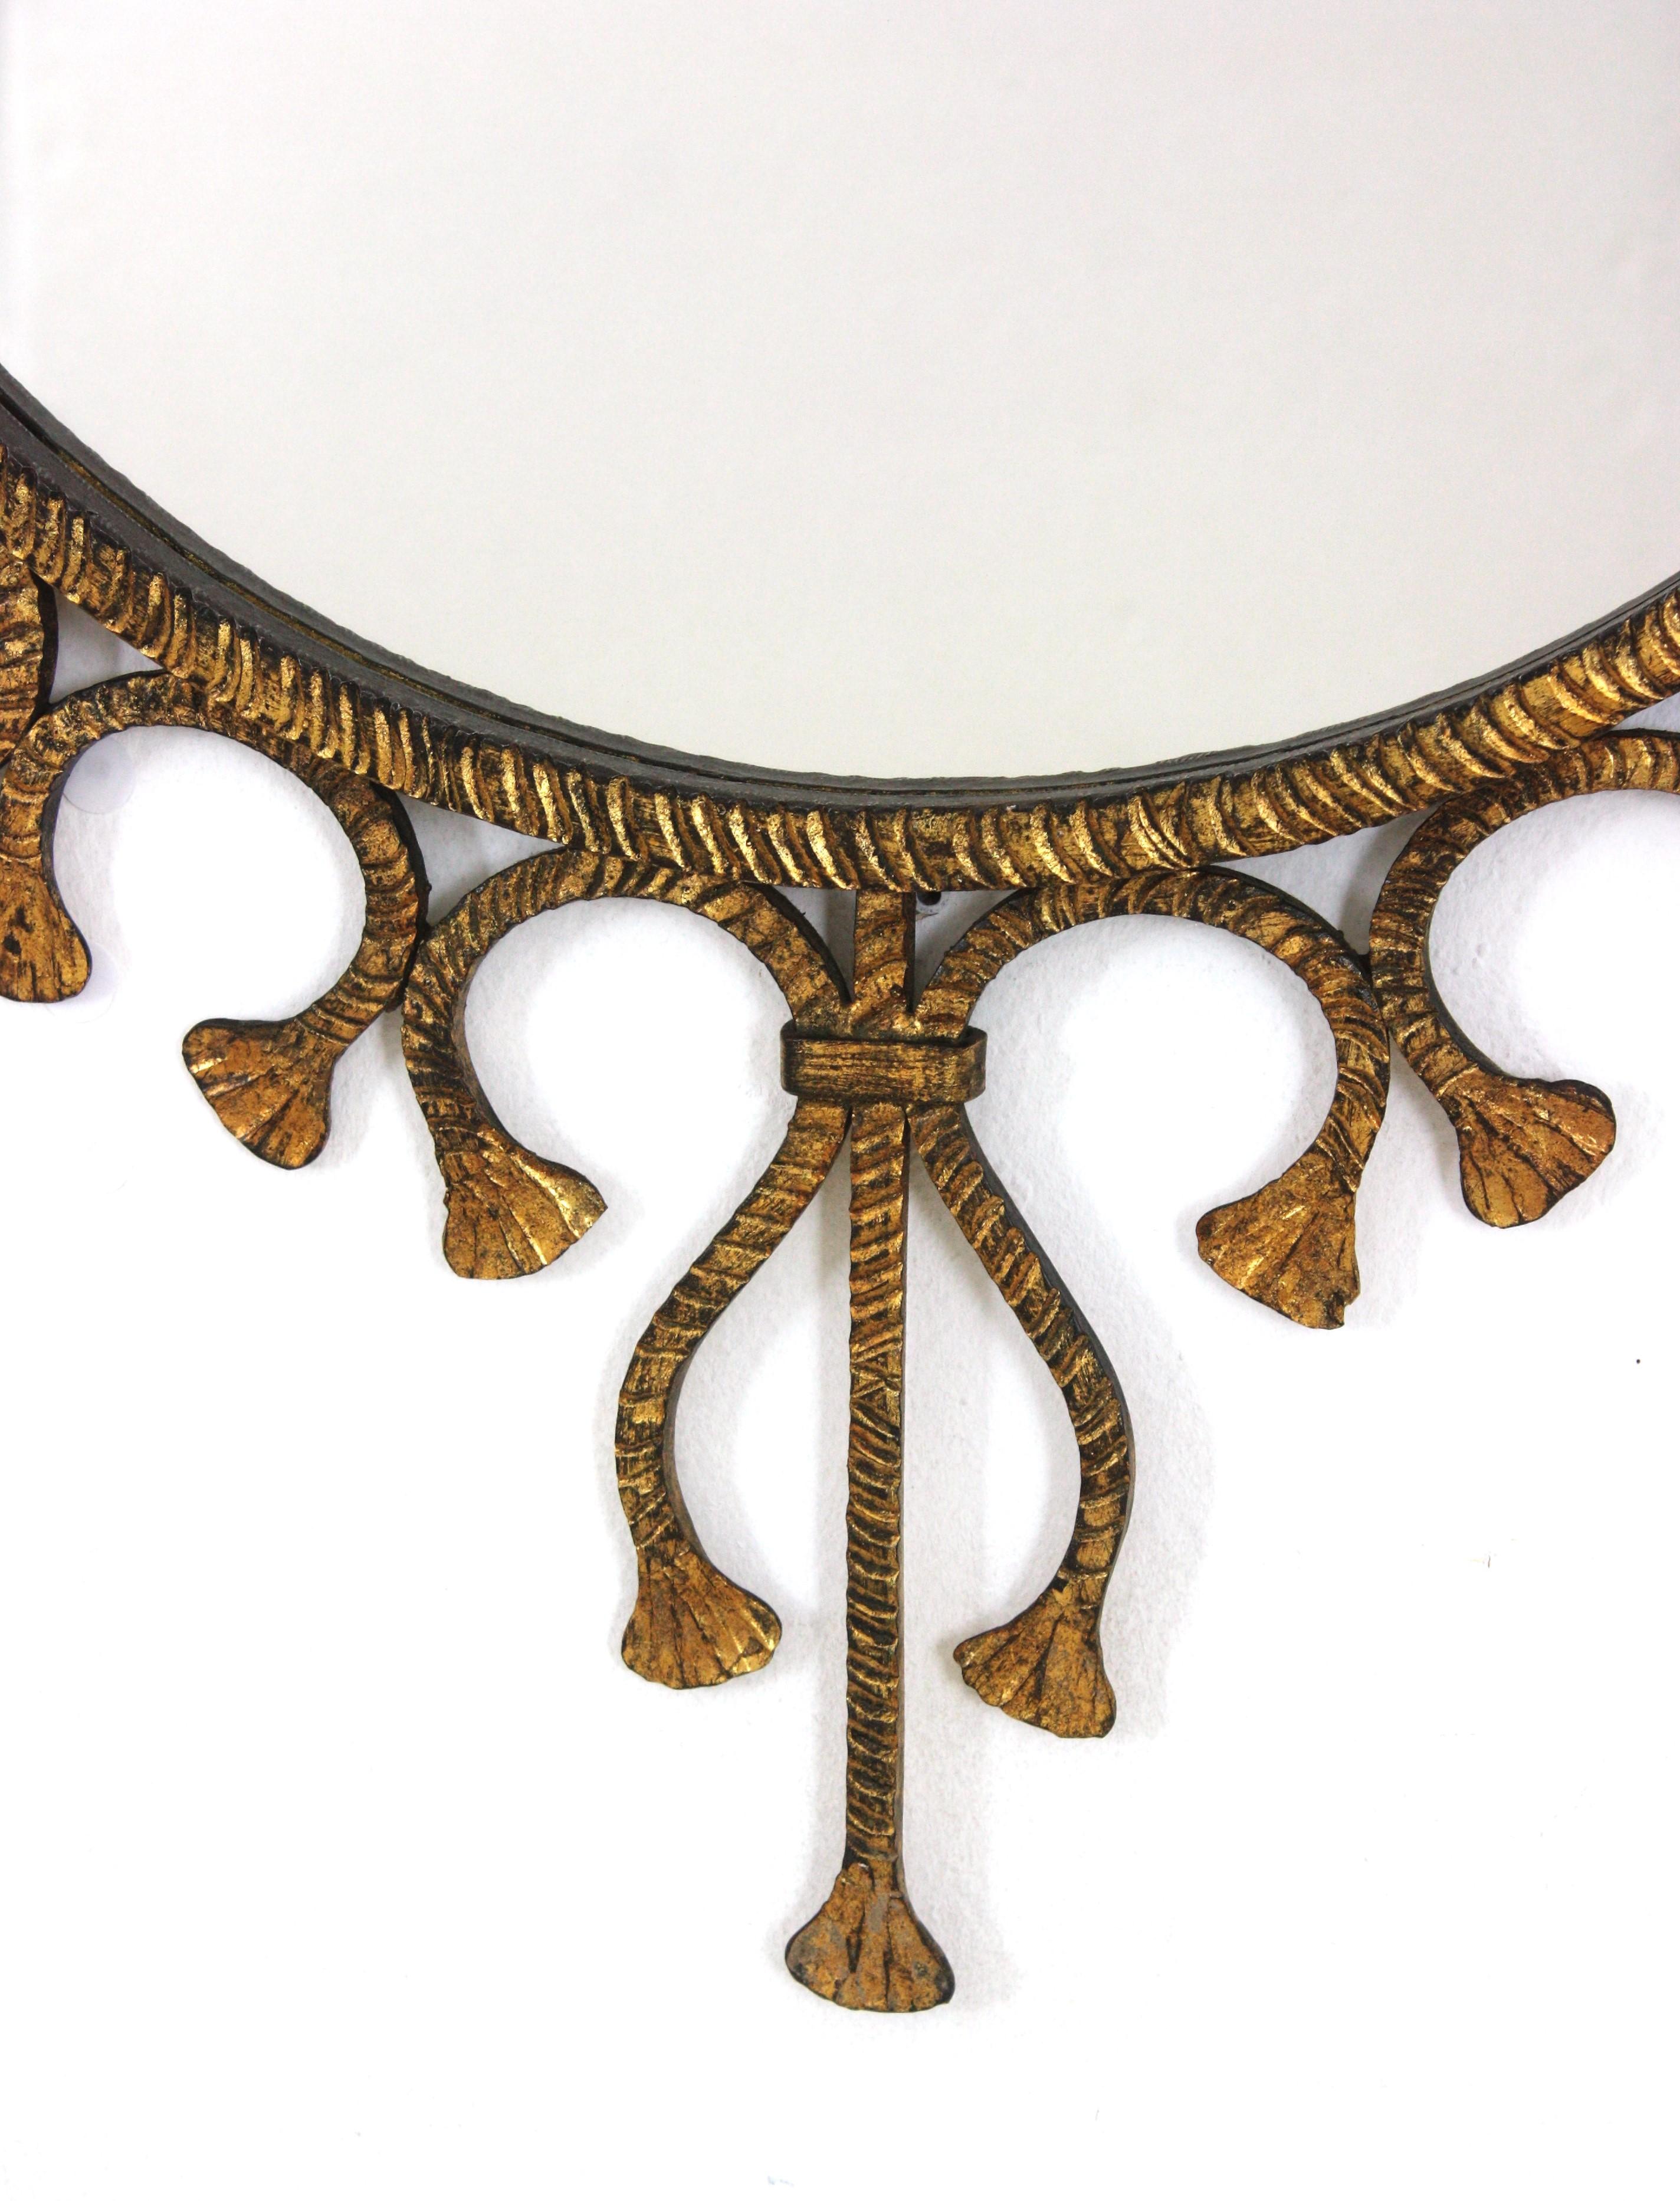 Forged Spanish Hollywood Regency Gilt Wrought Iron Oval Sunburst Mirror / Wall Mirror For Sale